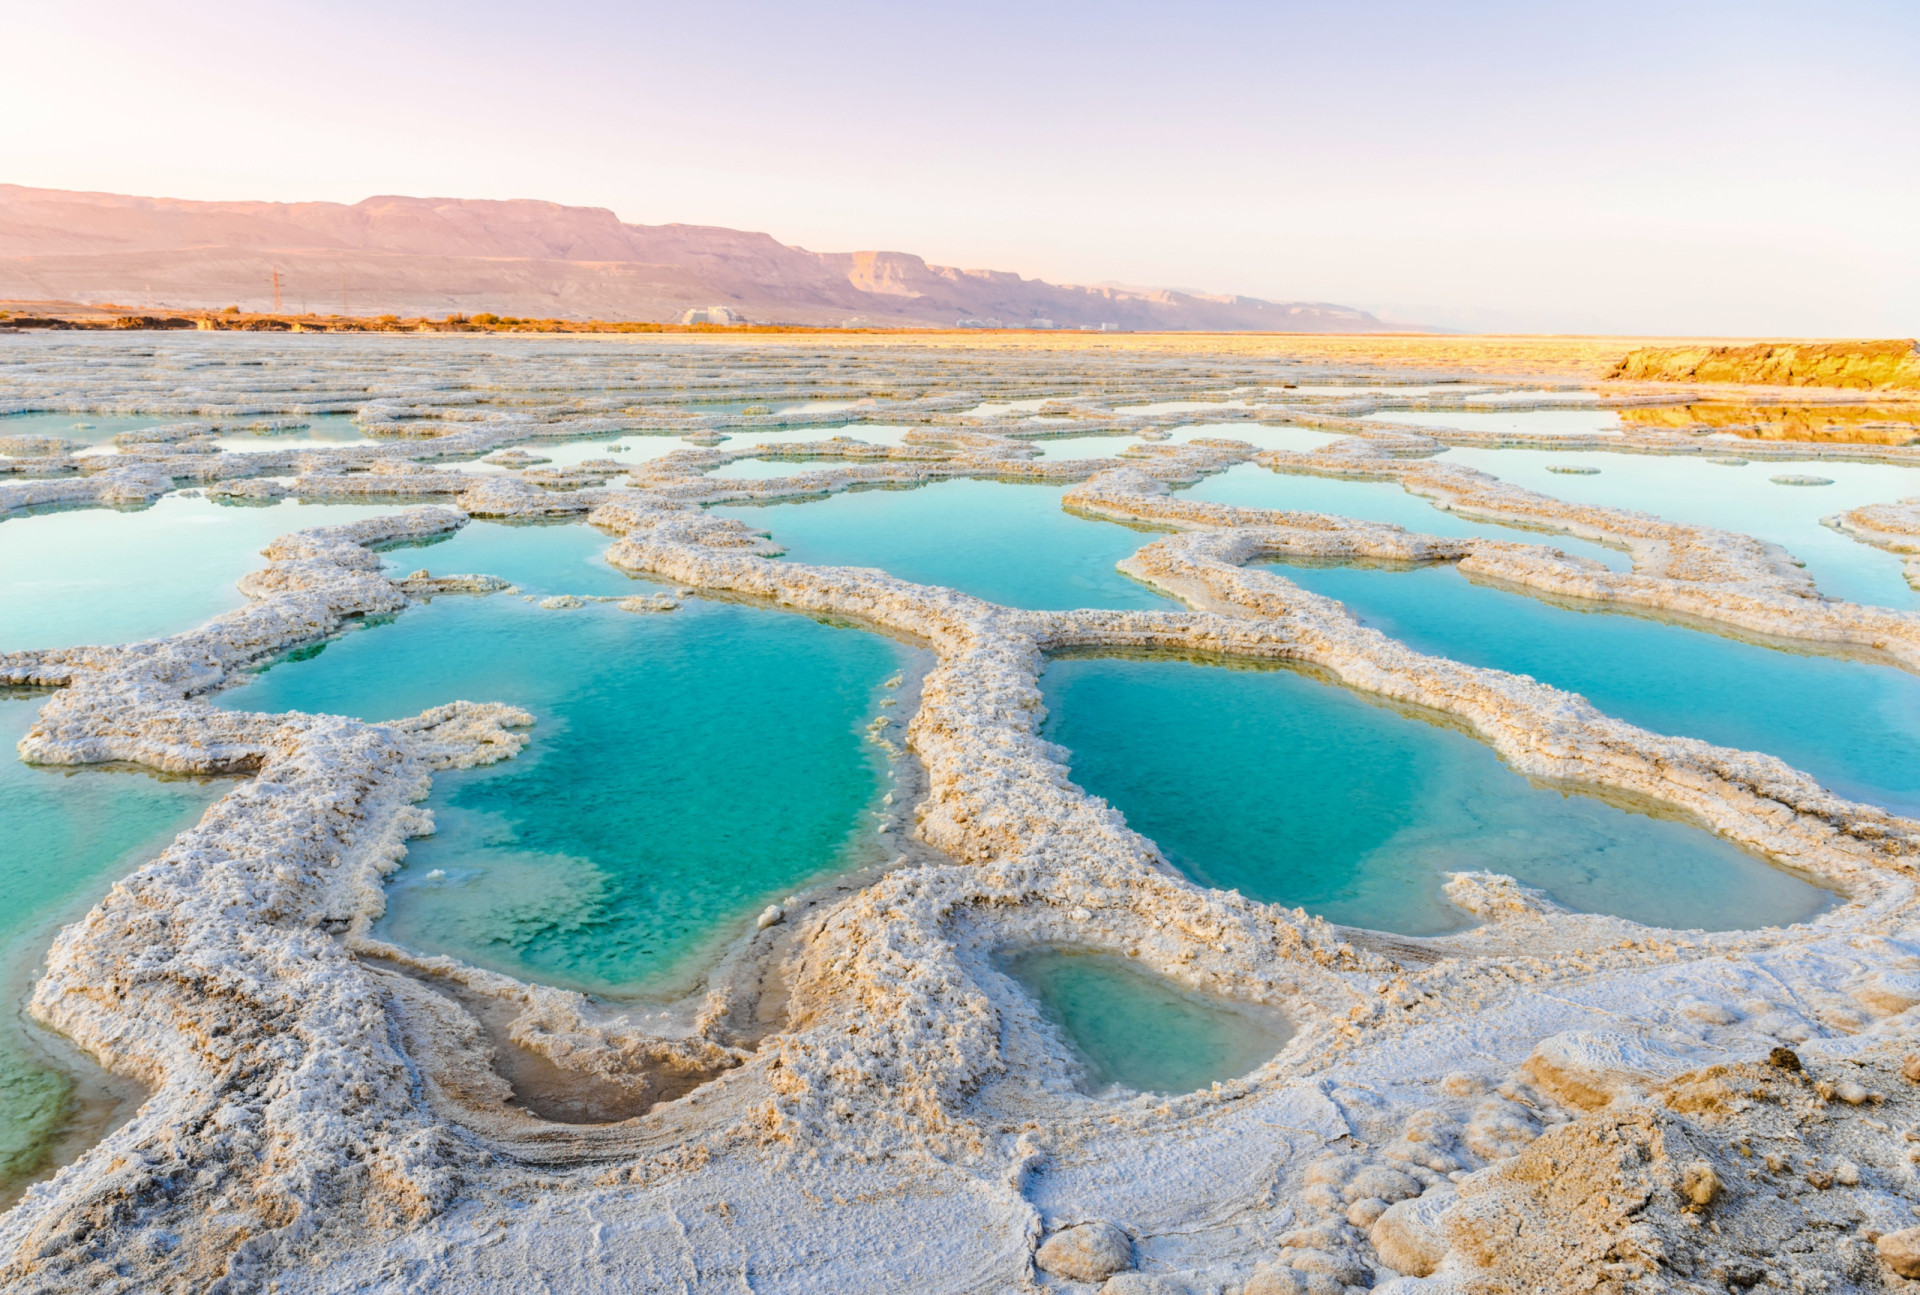 <p>This extraordinary natural wonder lies in the Jordan Rift Valley and is bordered by Jordan to the east and the West Bank and Israel to the west.</p><p>You may also like:<a href="https://www.starsinsider.com/n/119097?utm_source=msn.com&utm_medium=display&utm_campaign=referral_description&utm_content=573453en-en"> Harmful to health: the hidden hazards of food and drink </a></p>